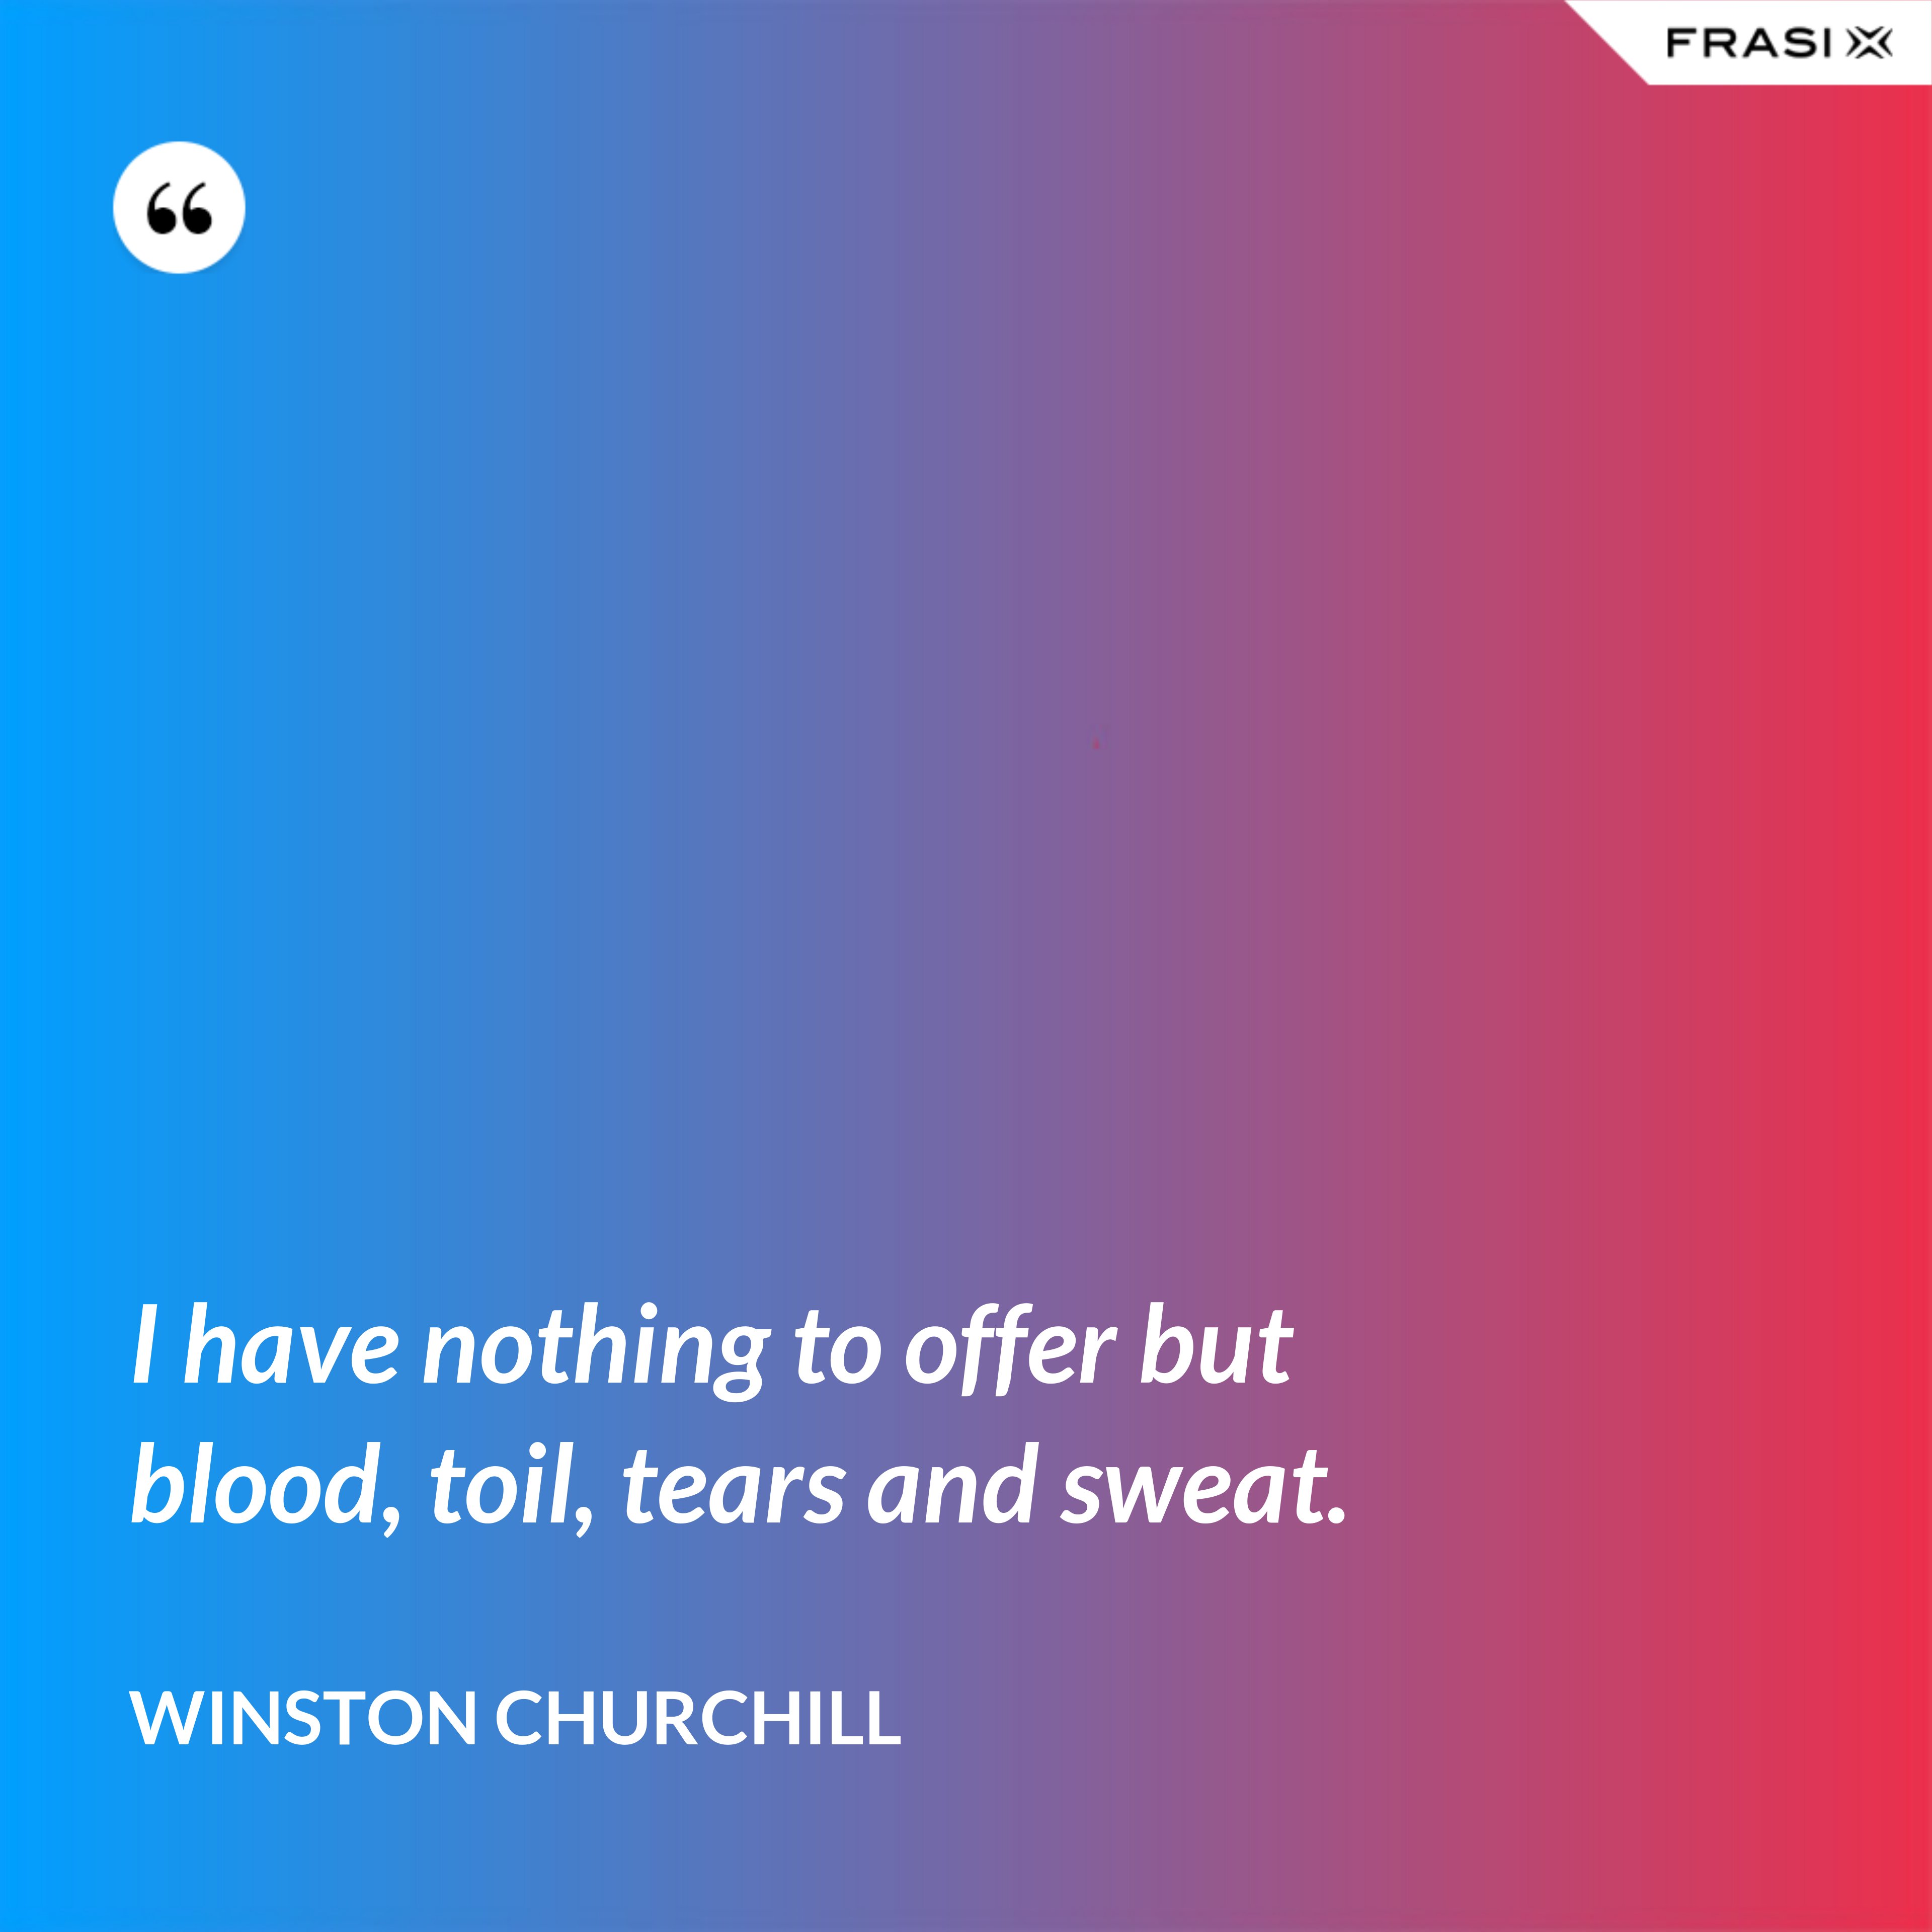 I have nothing to offer but blood, toil, tears and sweat. - Winston Churchill